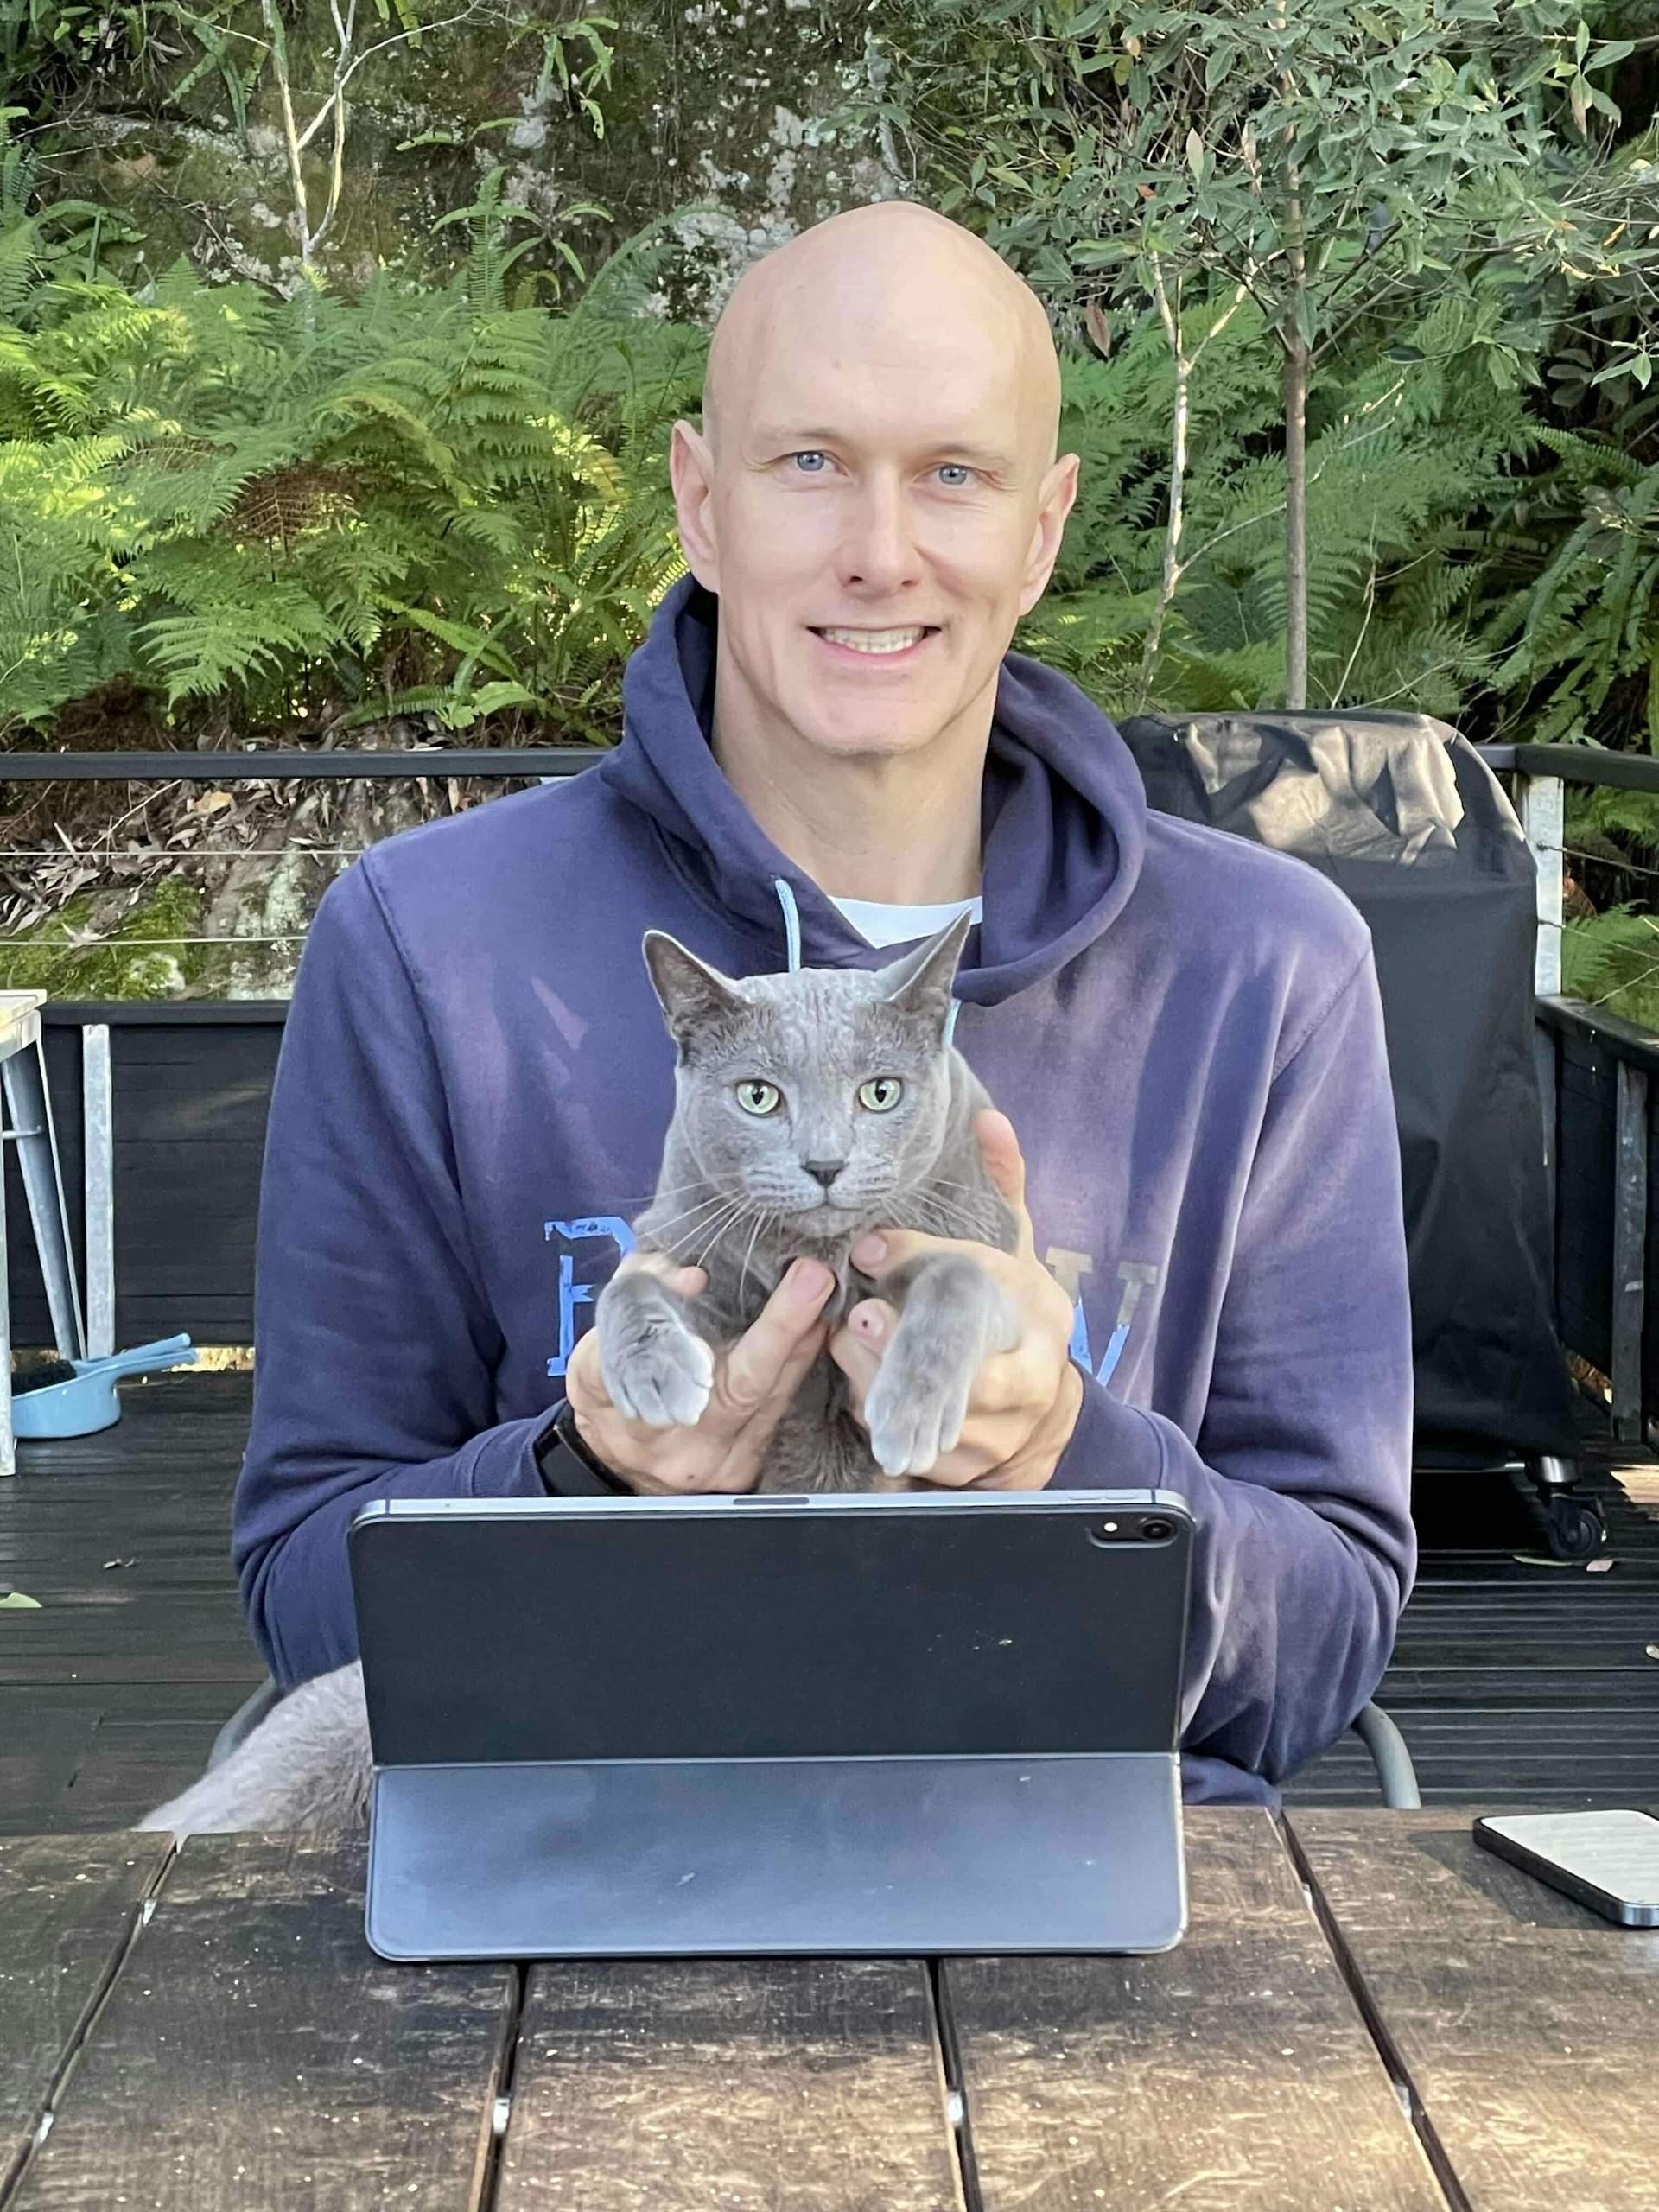 Brendan smiles at the camera, holding a grey cat in his hands.